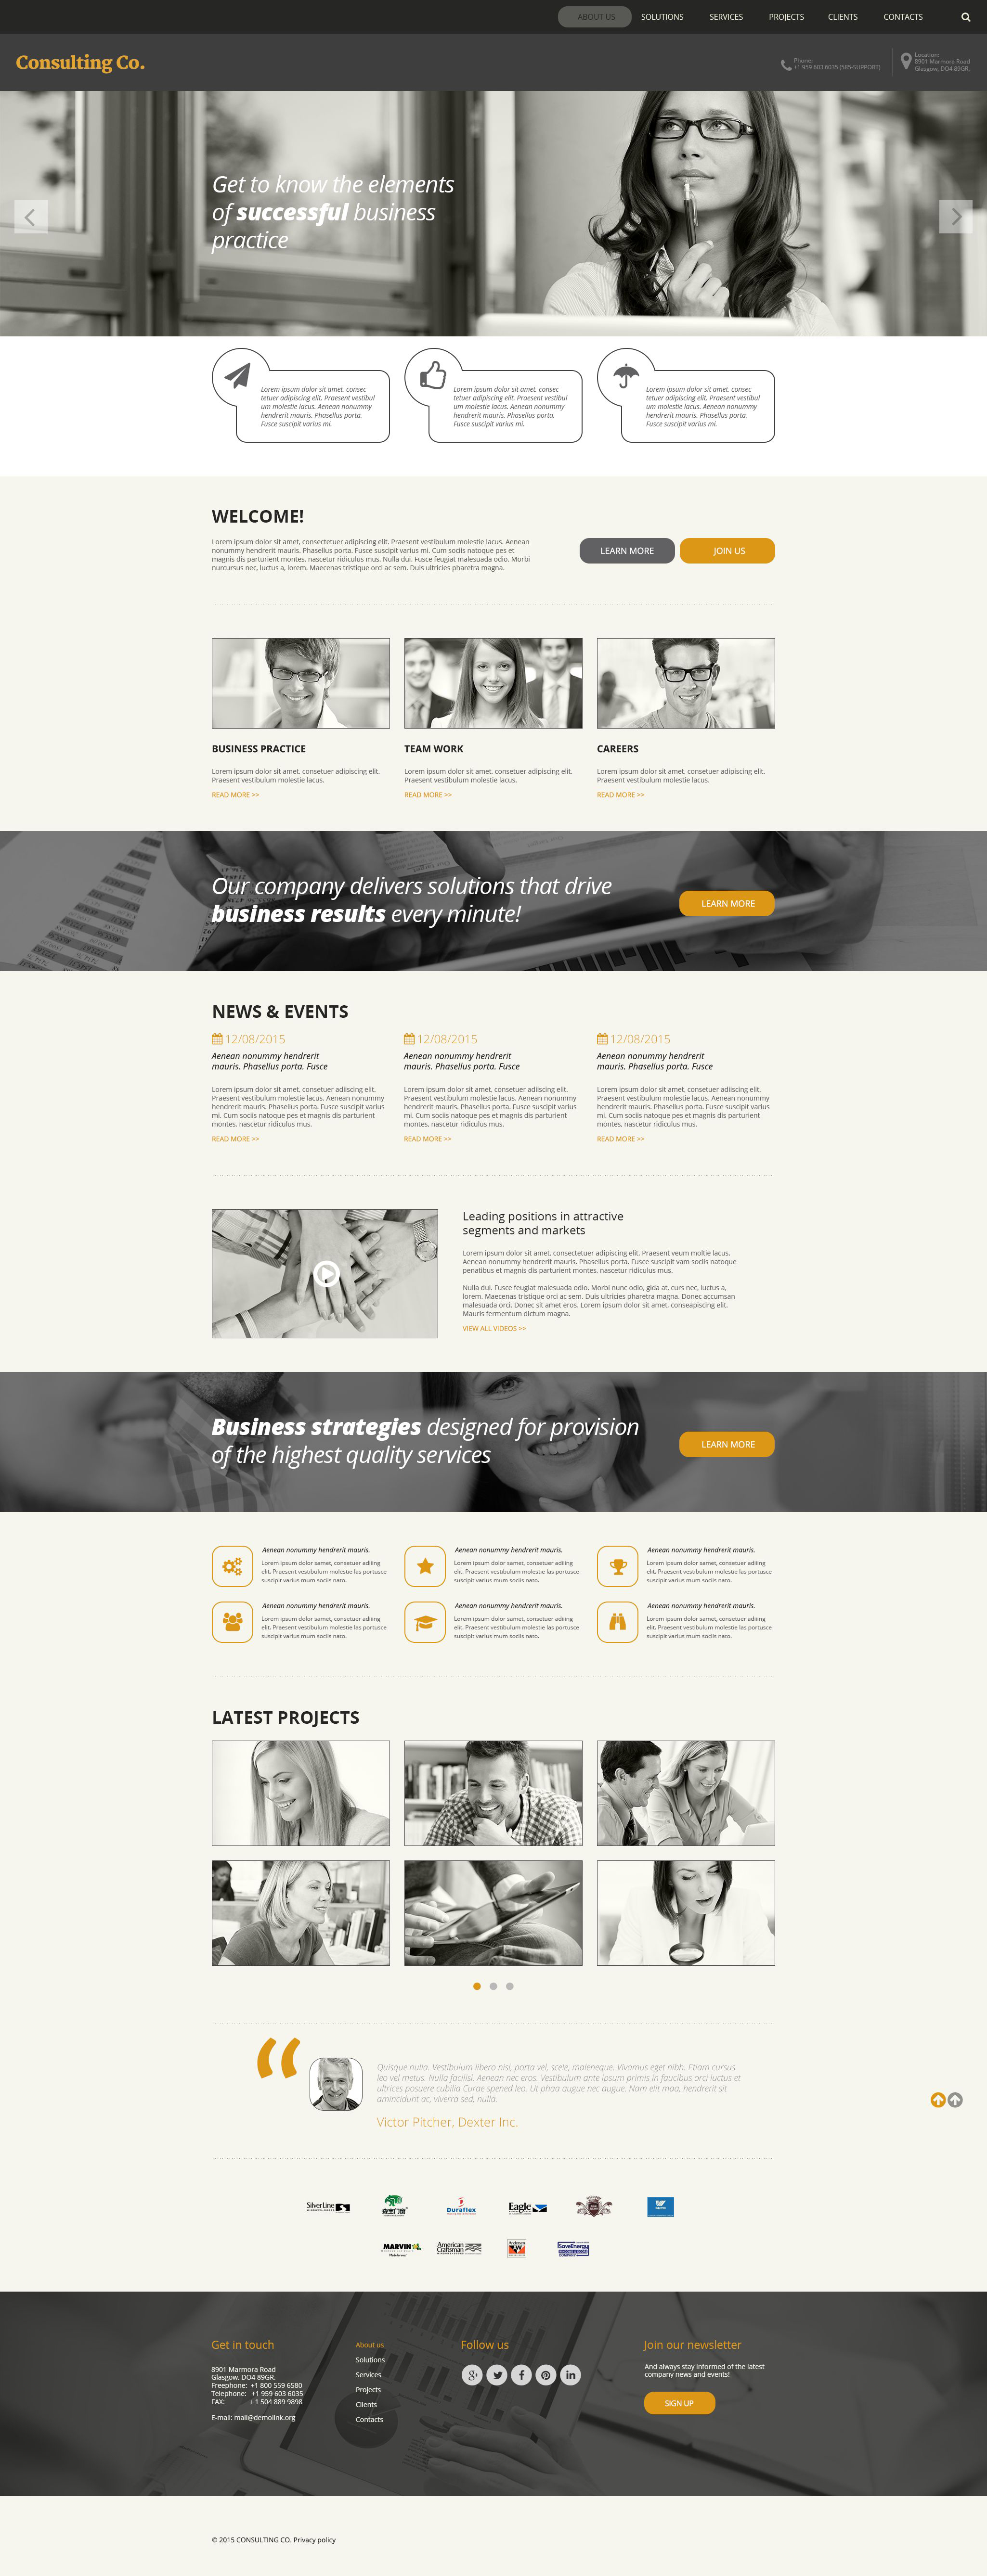 Consulting Co. Website Template